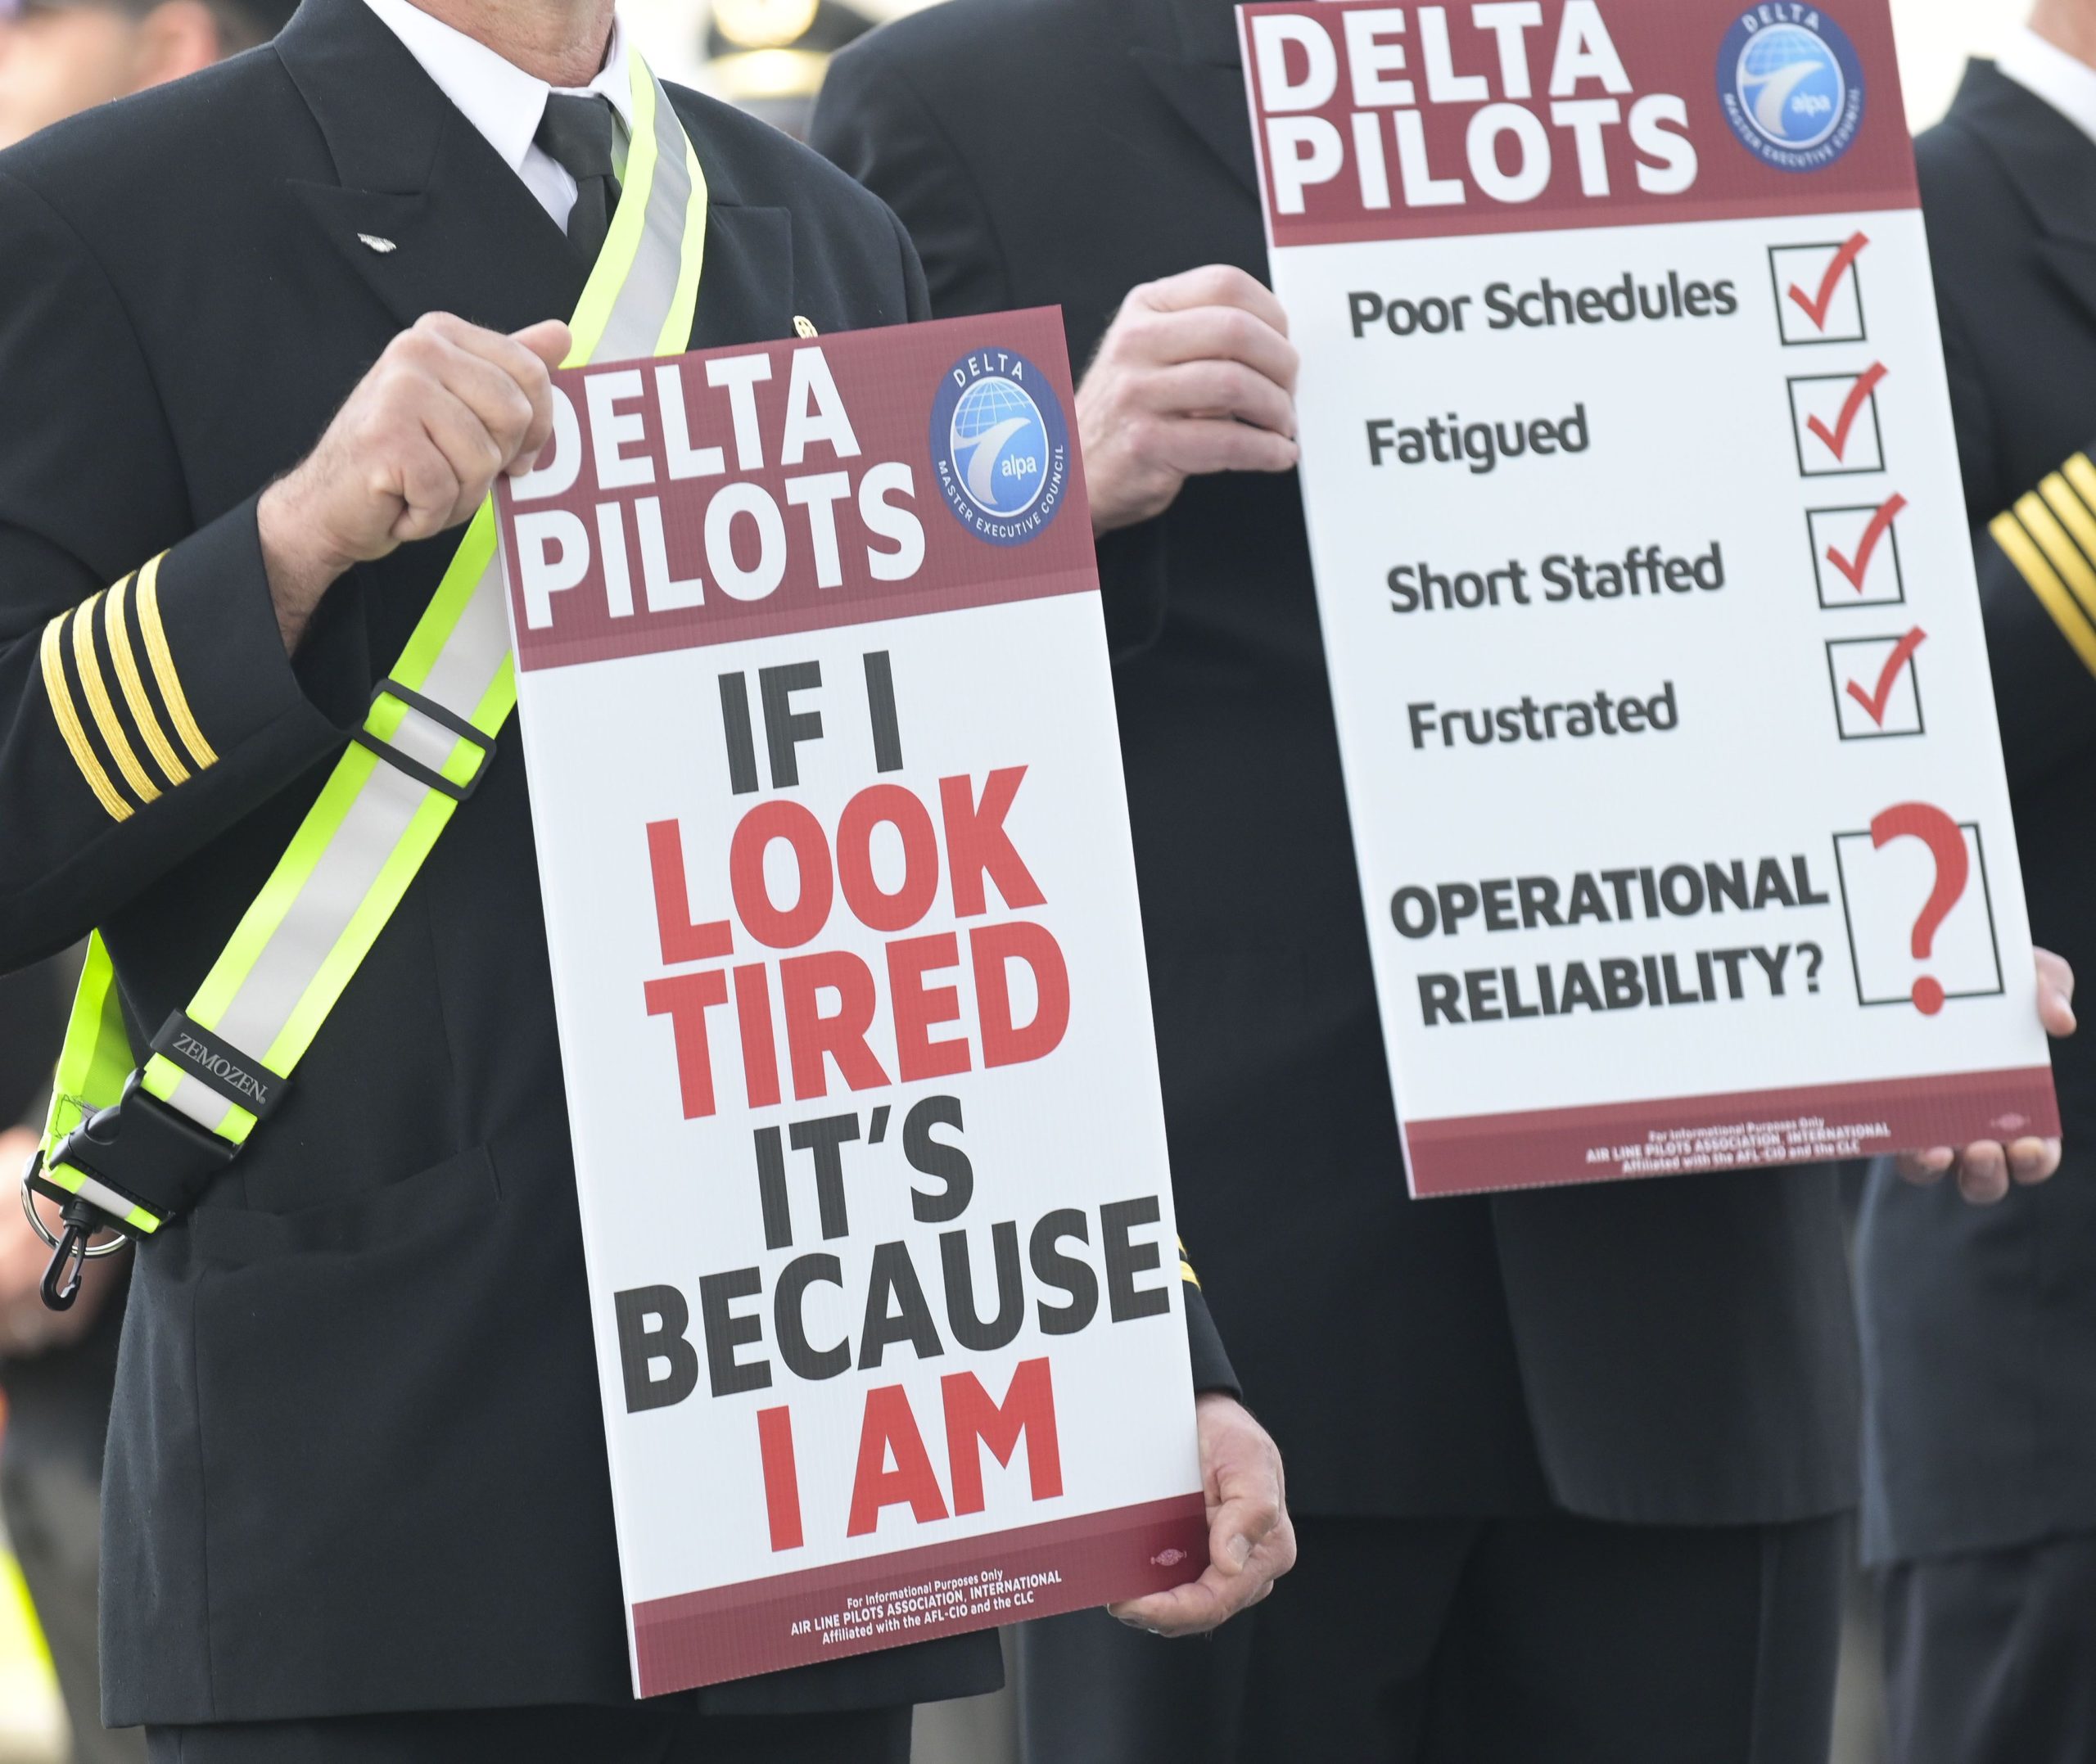 Pilots Are Claiming Exhaustion. Do We Really Want Them Flying Our Children? &#8211; Live and Let&#039;s Fly Delta Pilots Tired Fatigued scaled